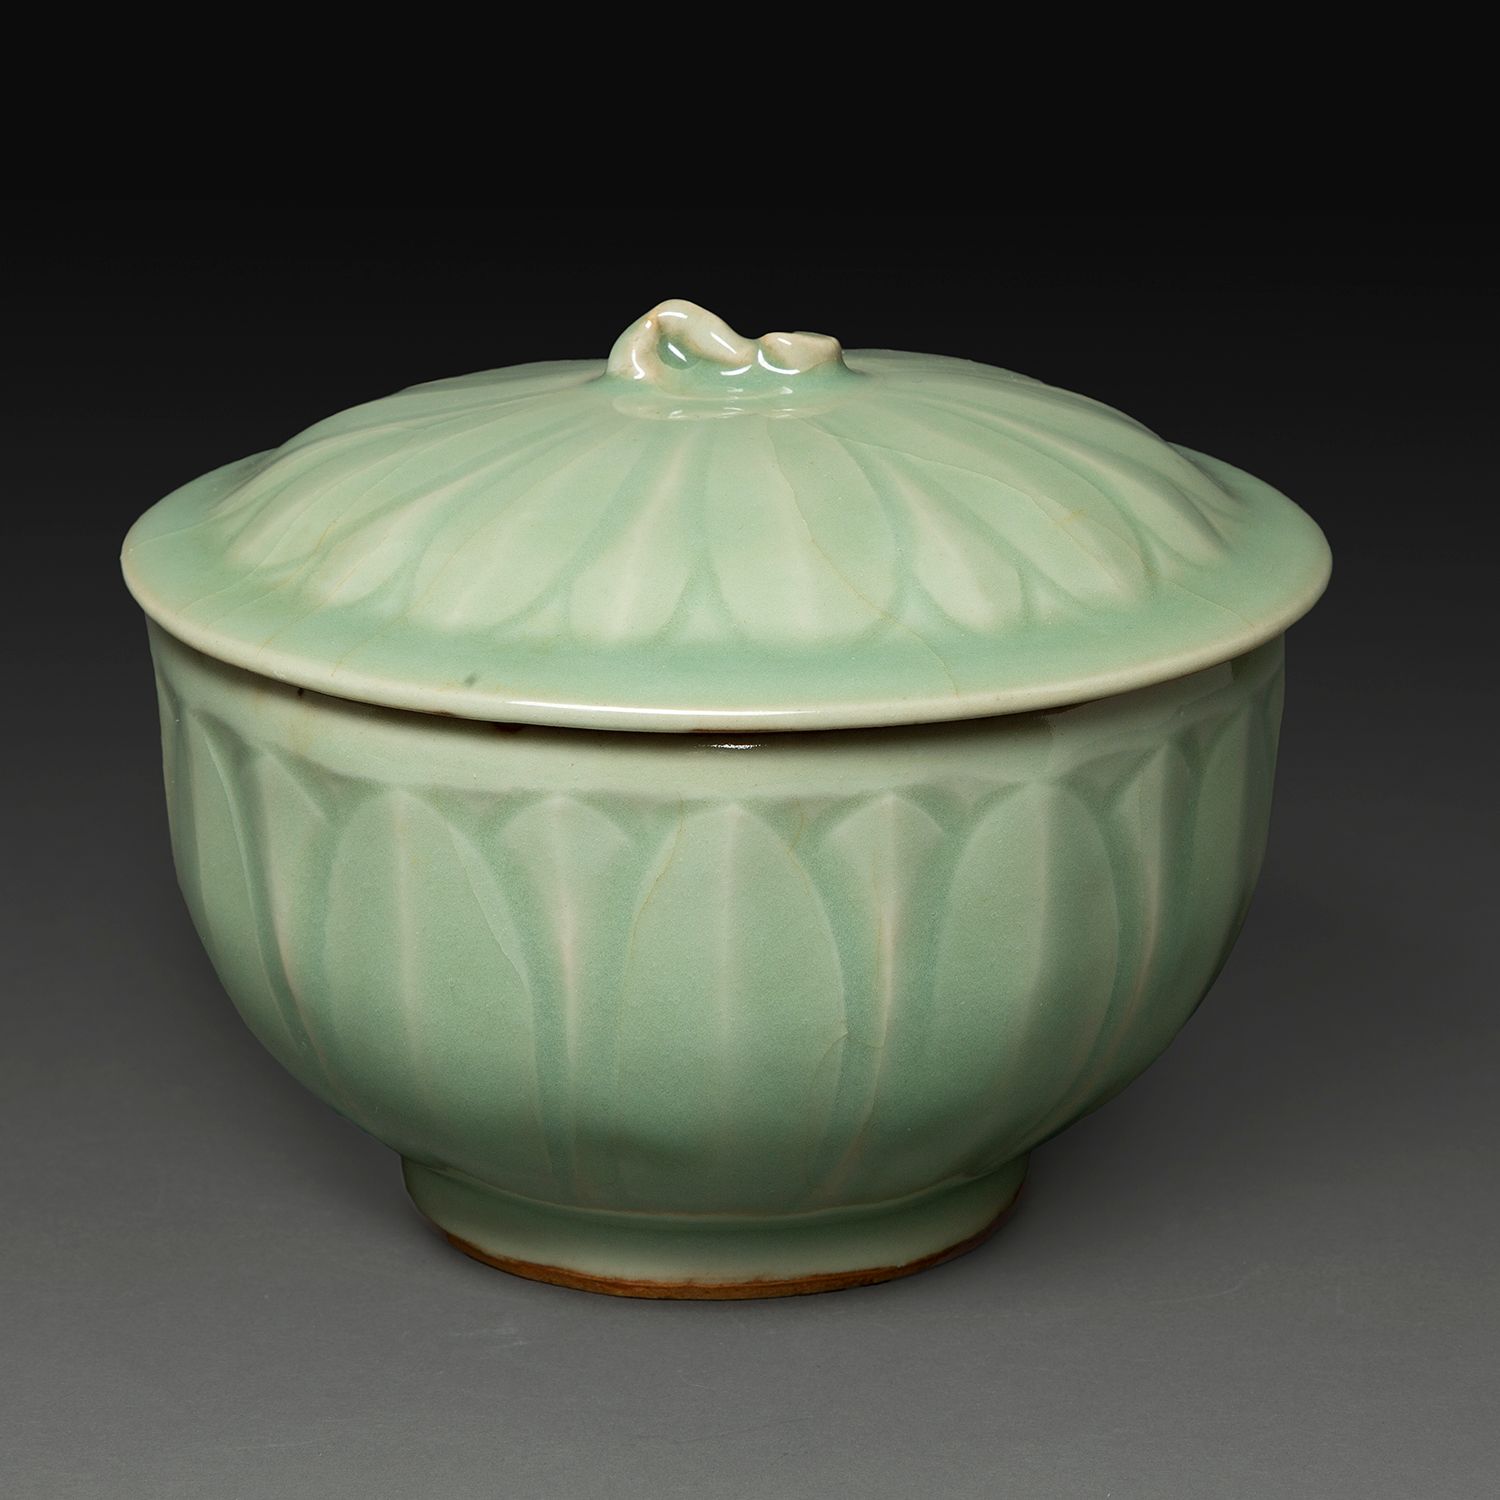 Null COVERED TERRACE
in ceramic and celadon glaze, Longquan style. The underglaz&hellip;